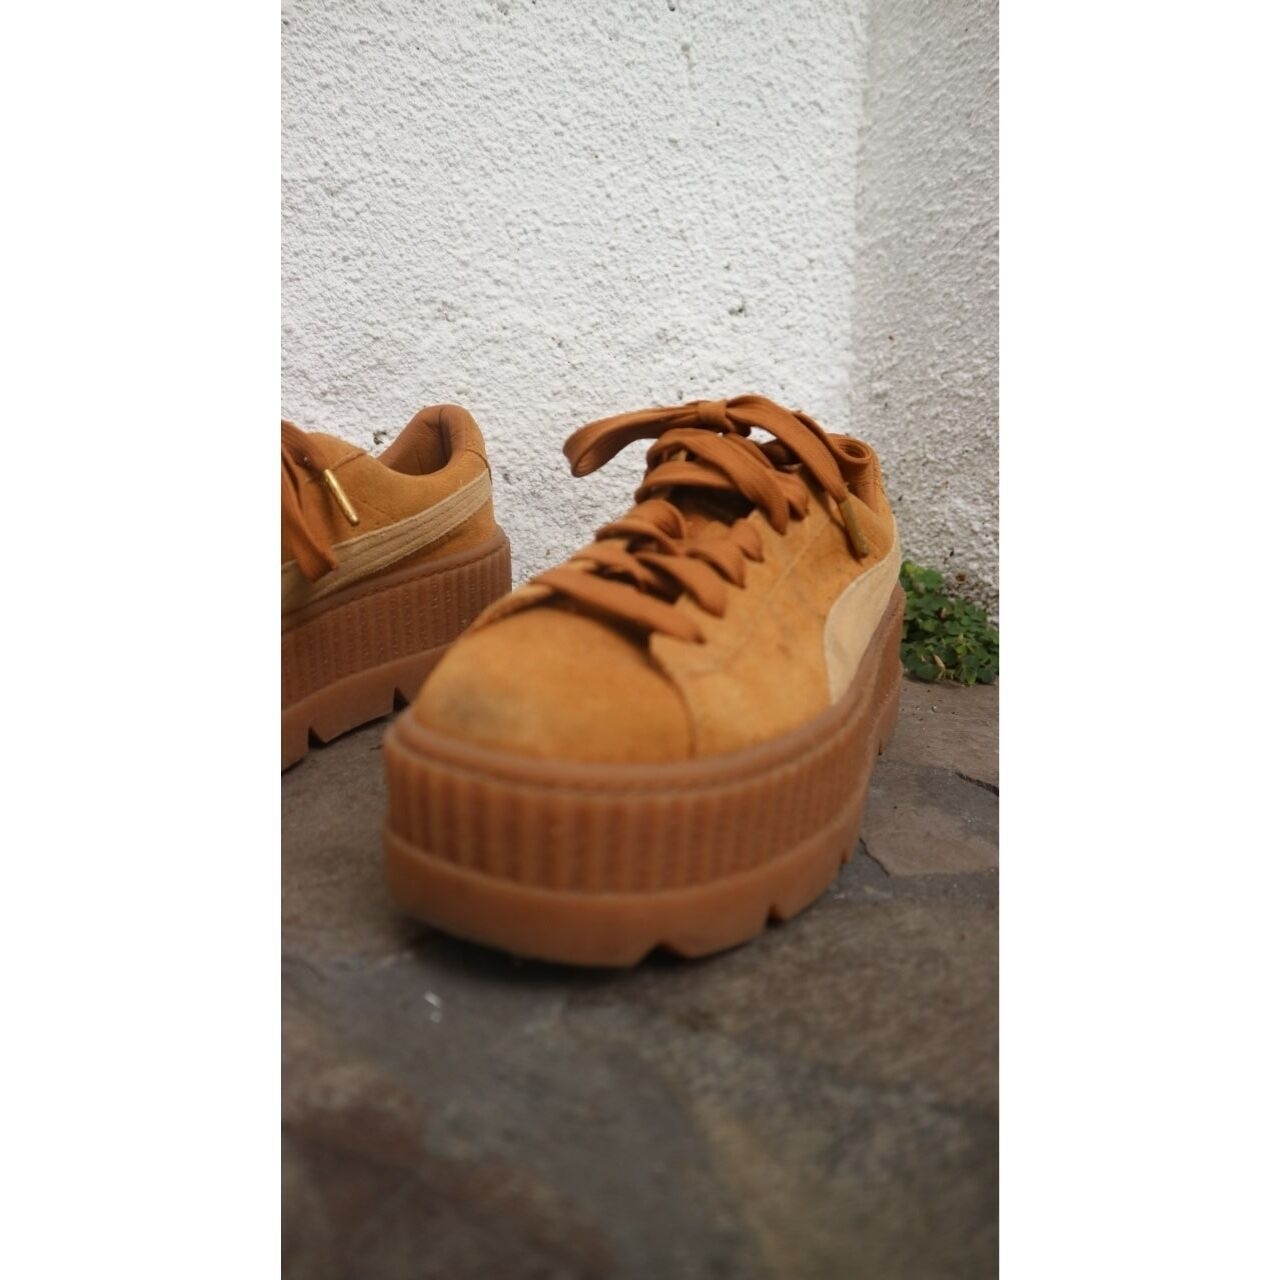 Puma Fenty by Rihanna Cleated Creeper Suede Brown Sneakers